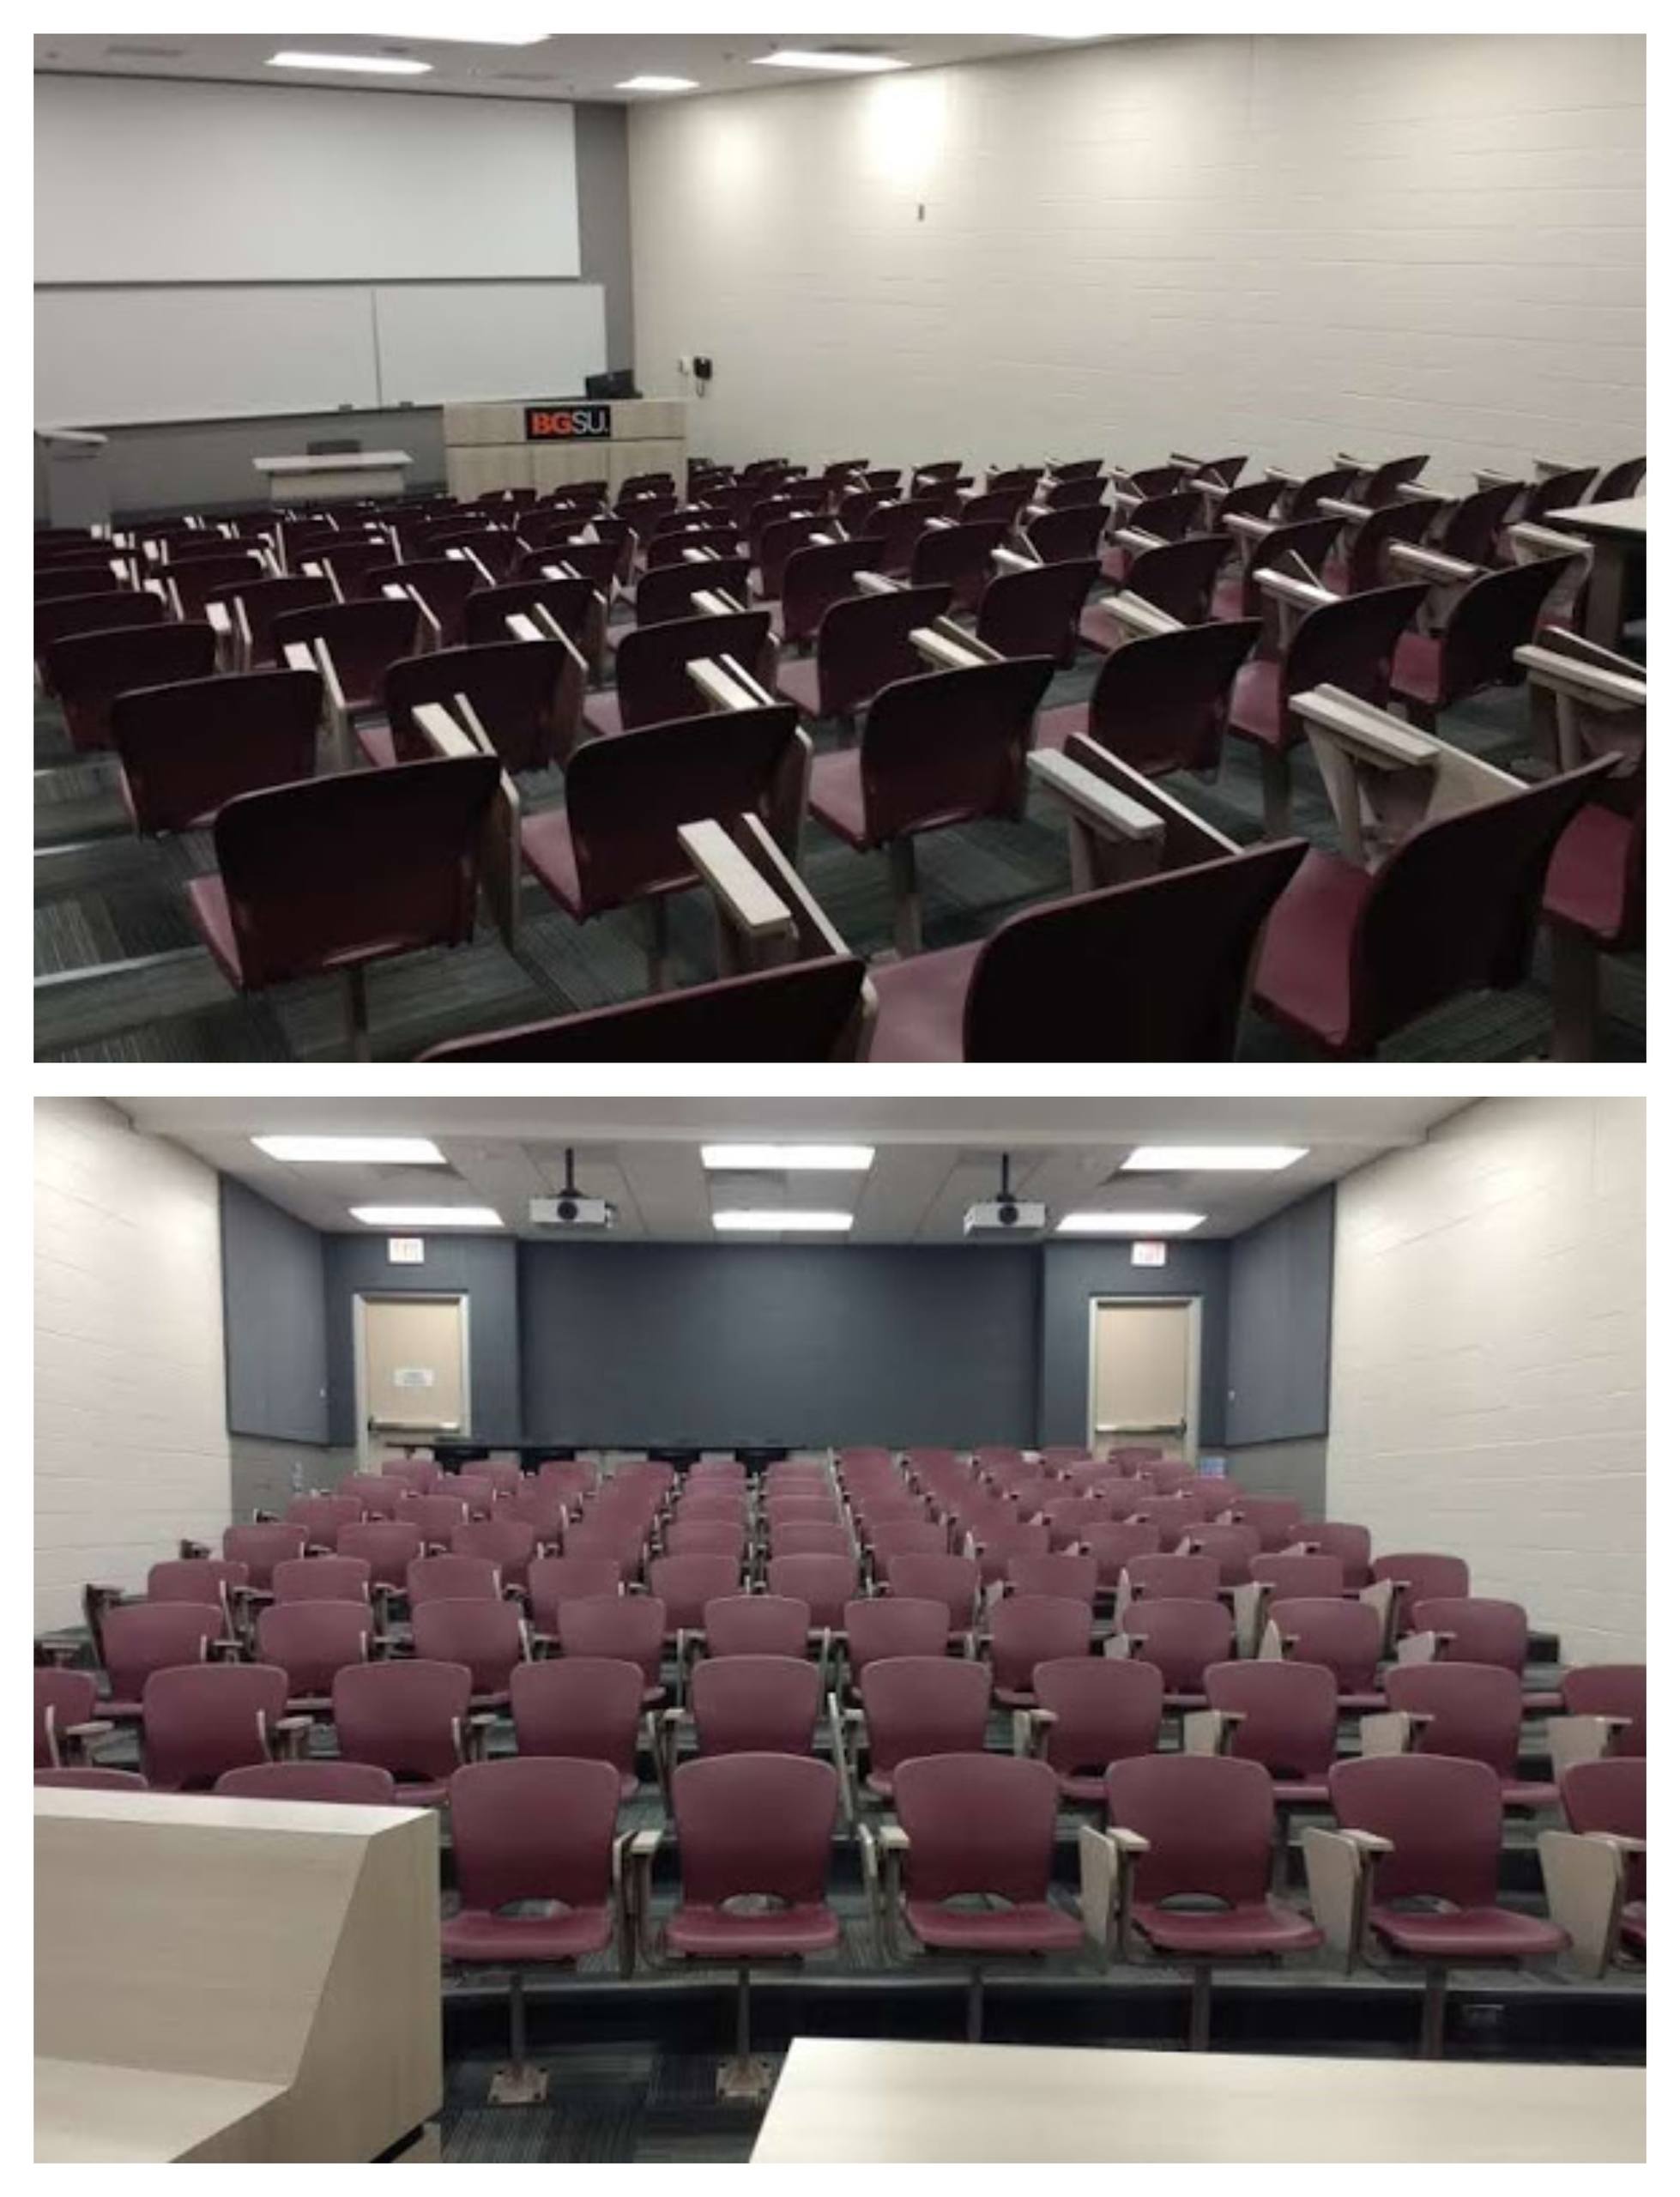 Olscamp Room 221 Front & Back View 